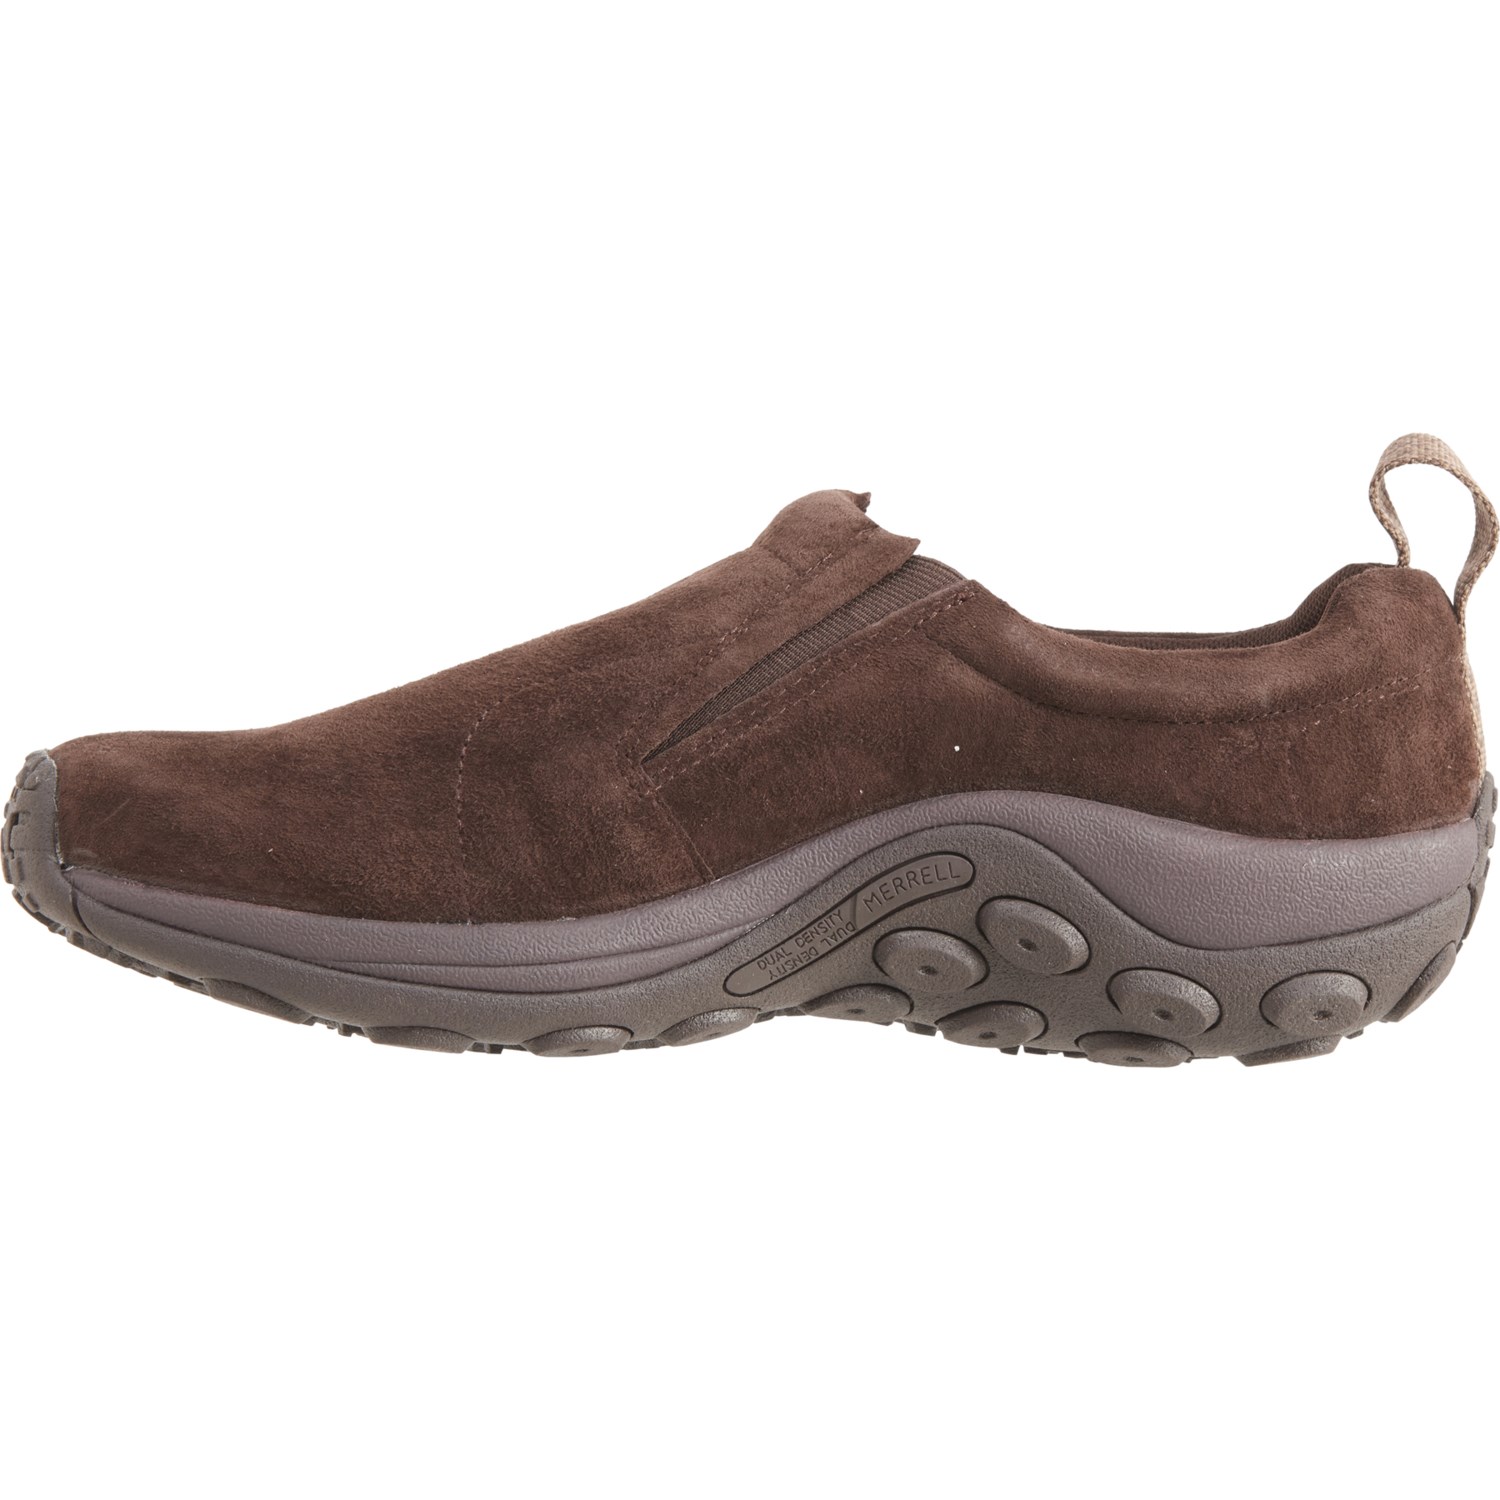 Merrell Jungle Moc Rinse Shoes (For Men) - Save 28%